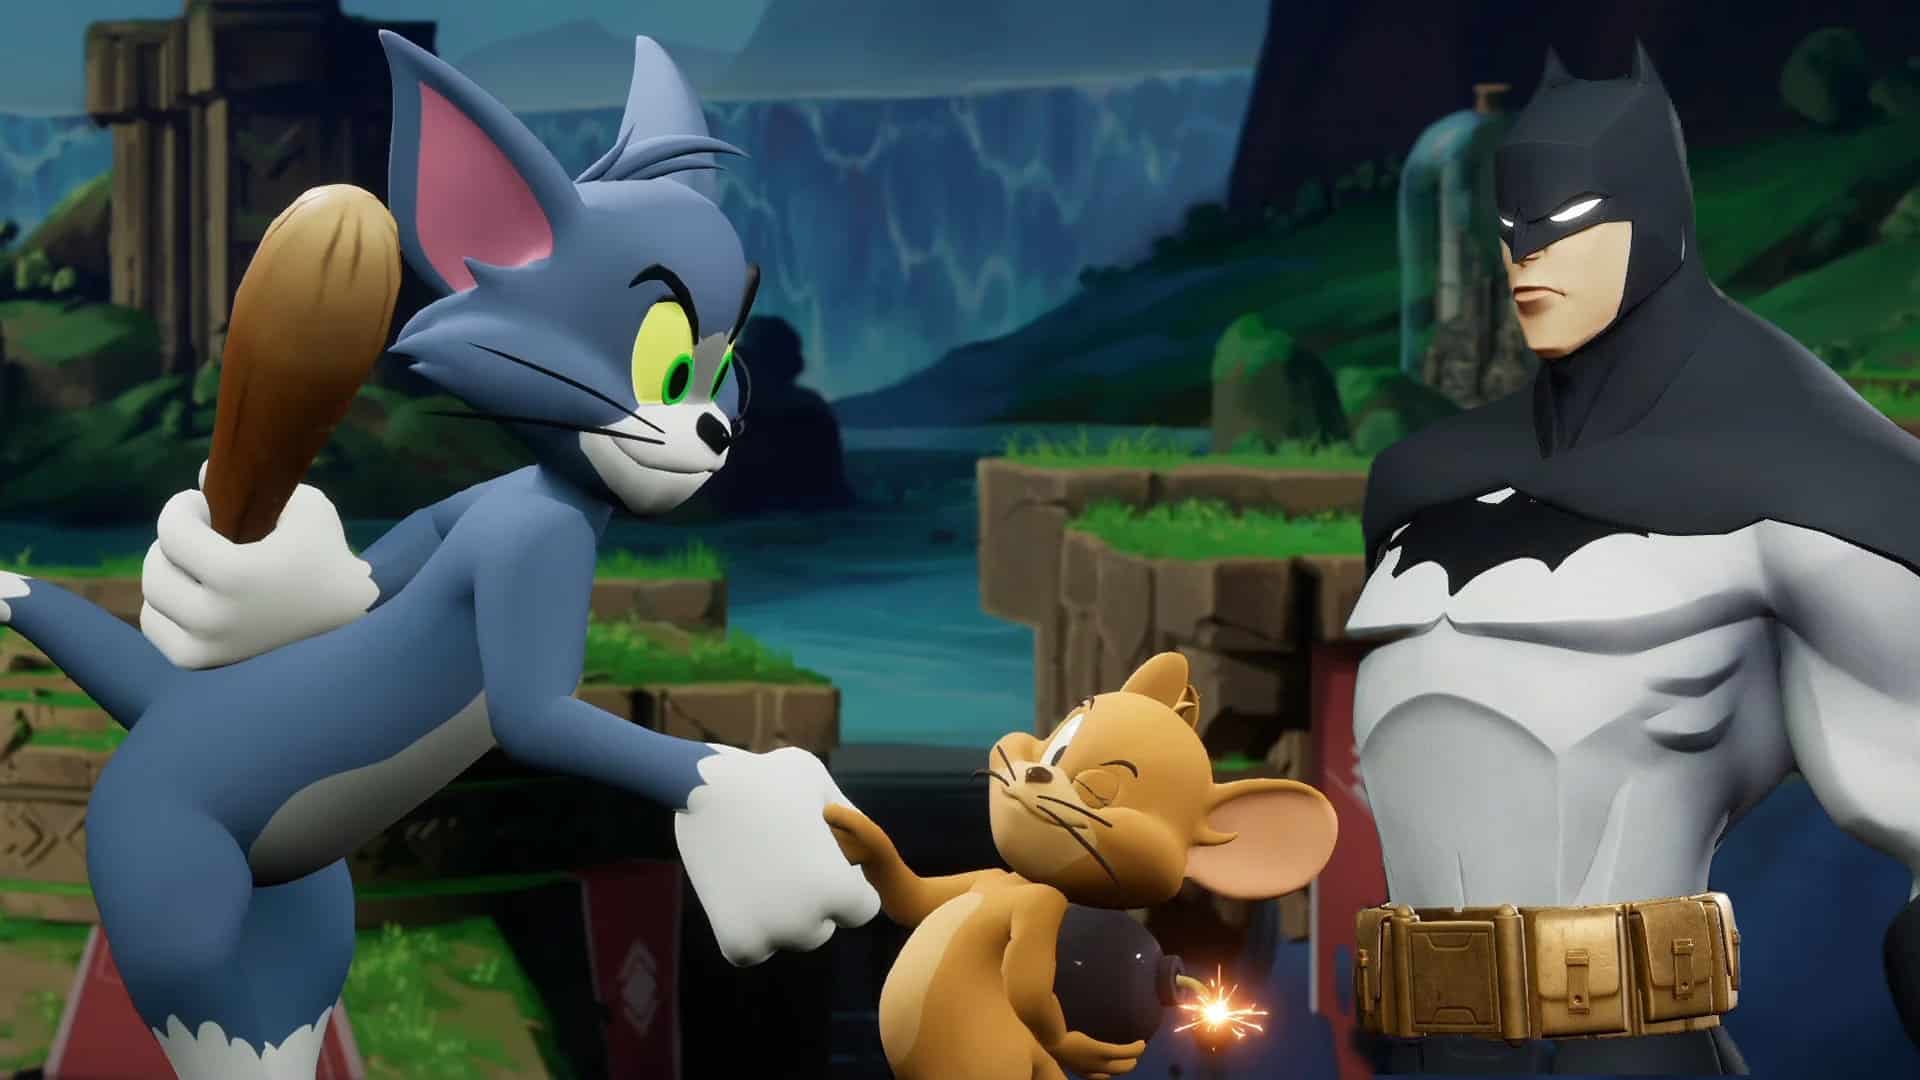 New Fighting Game On Steam Lets Tom And Jerry Fight Batman - Gets 93% Positive Reviews